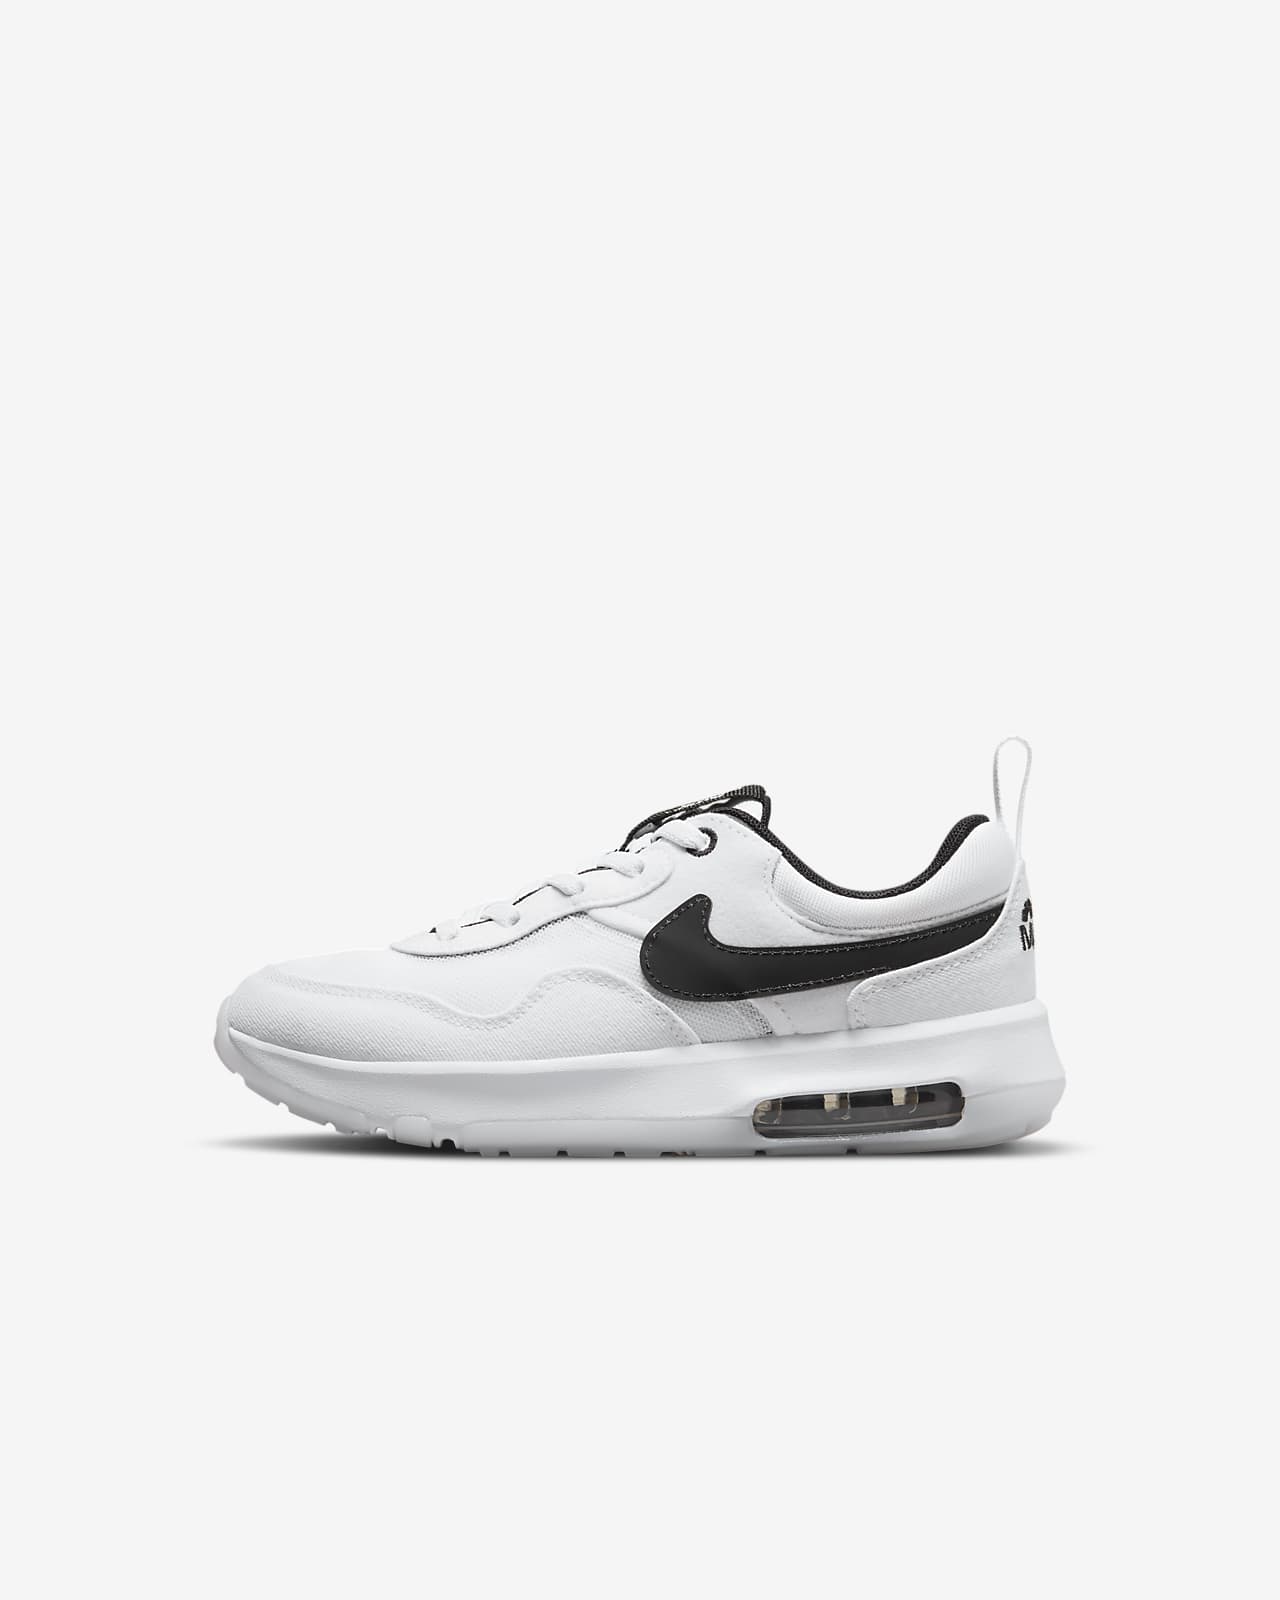 Investeren Reactor hond Nike Air Max Motif Younger Kids' Shoes. Nike LU